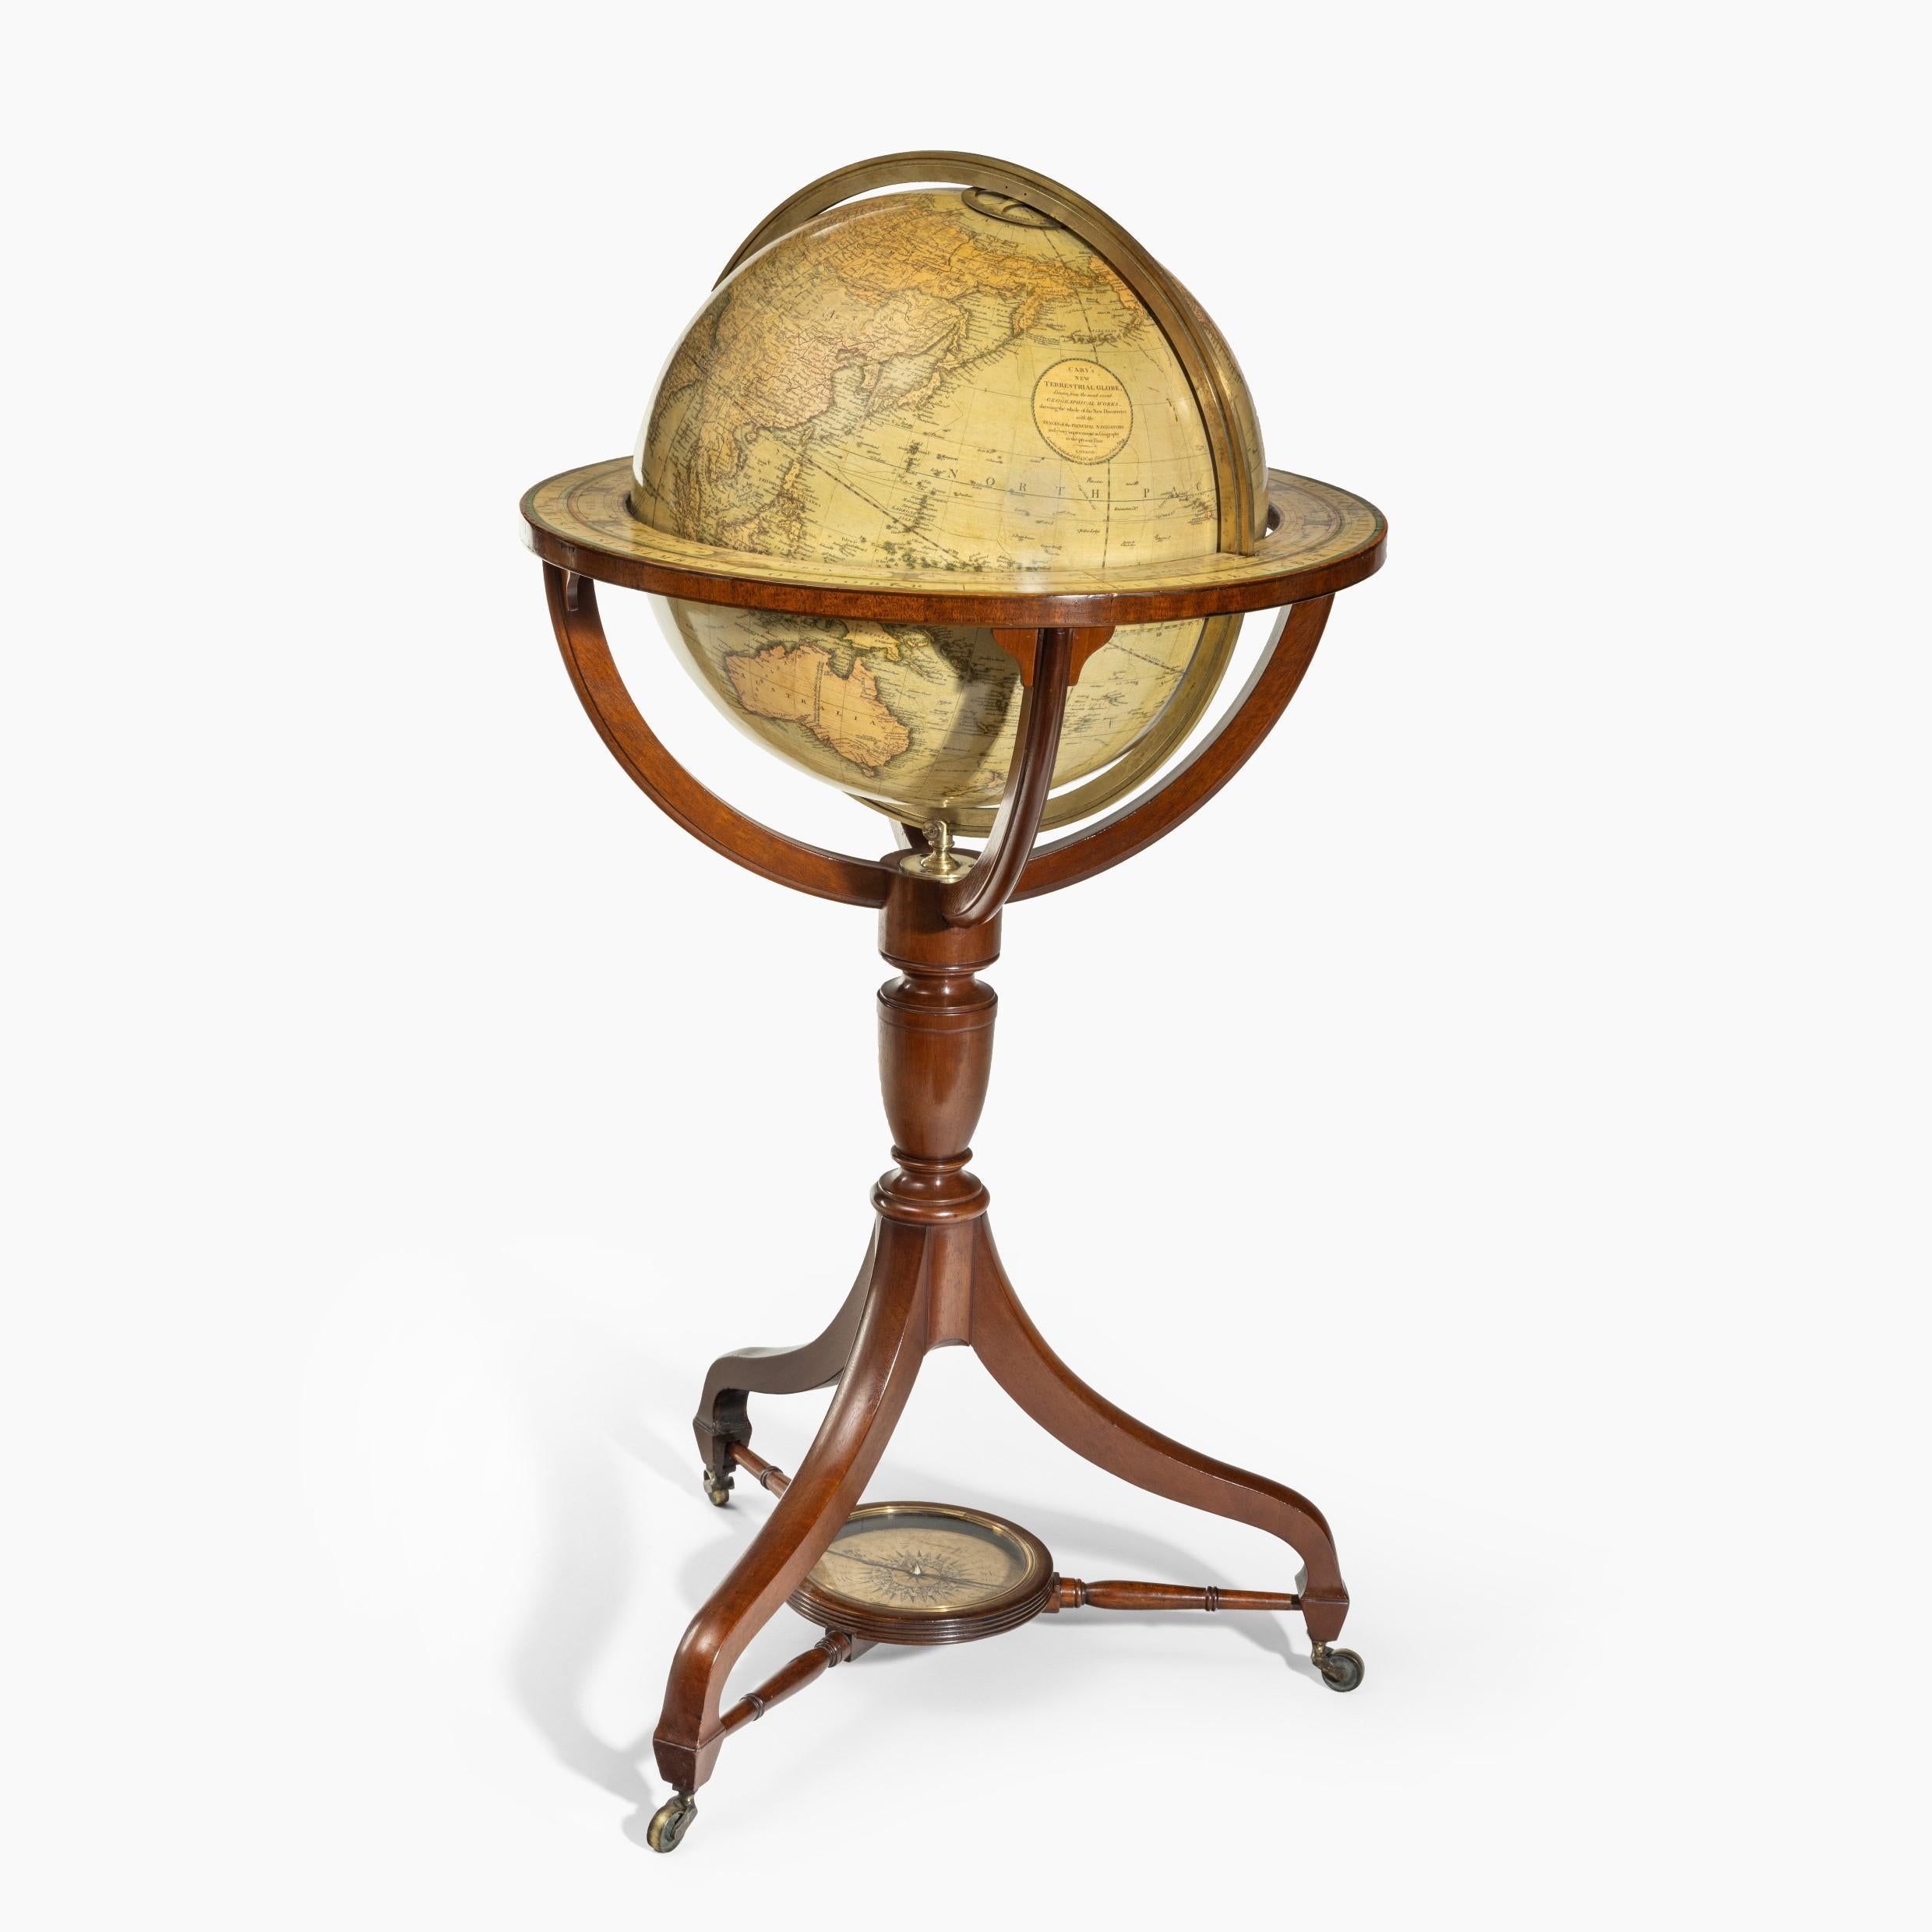 A George IV 18-inch floor-standing library globe by John Smith, set in a mahogany stand with a turned baluster support and three arched legs on brass castors joined by stretchers centred on a compass rose, the cartouche, surmounted by a royal crest,